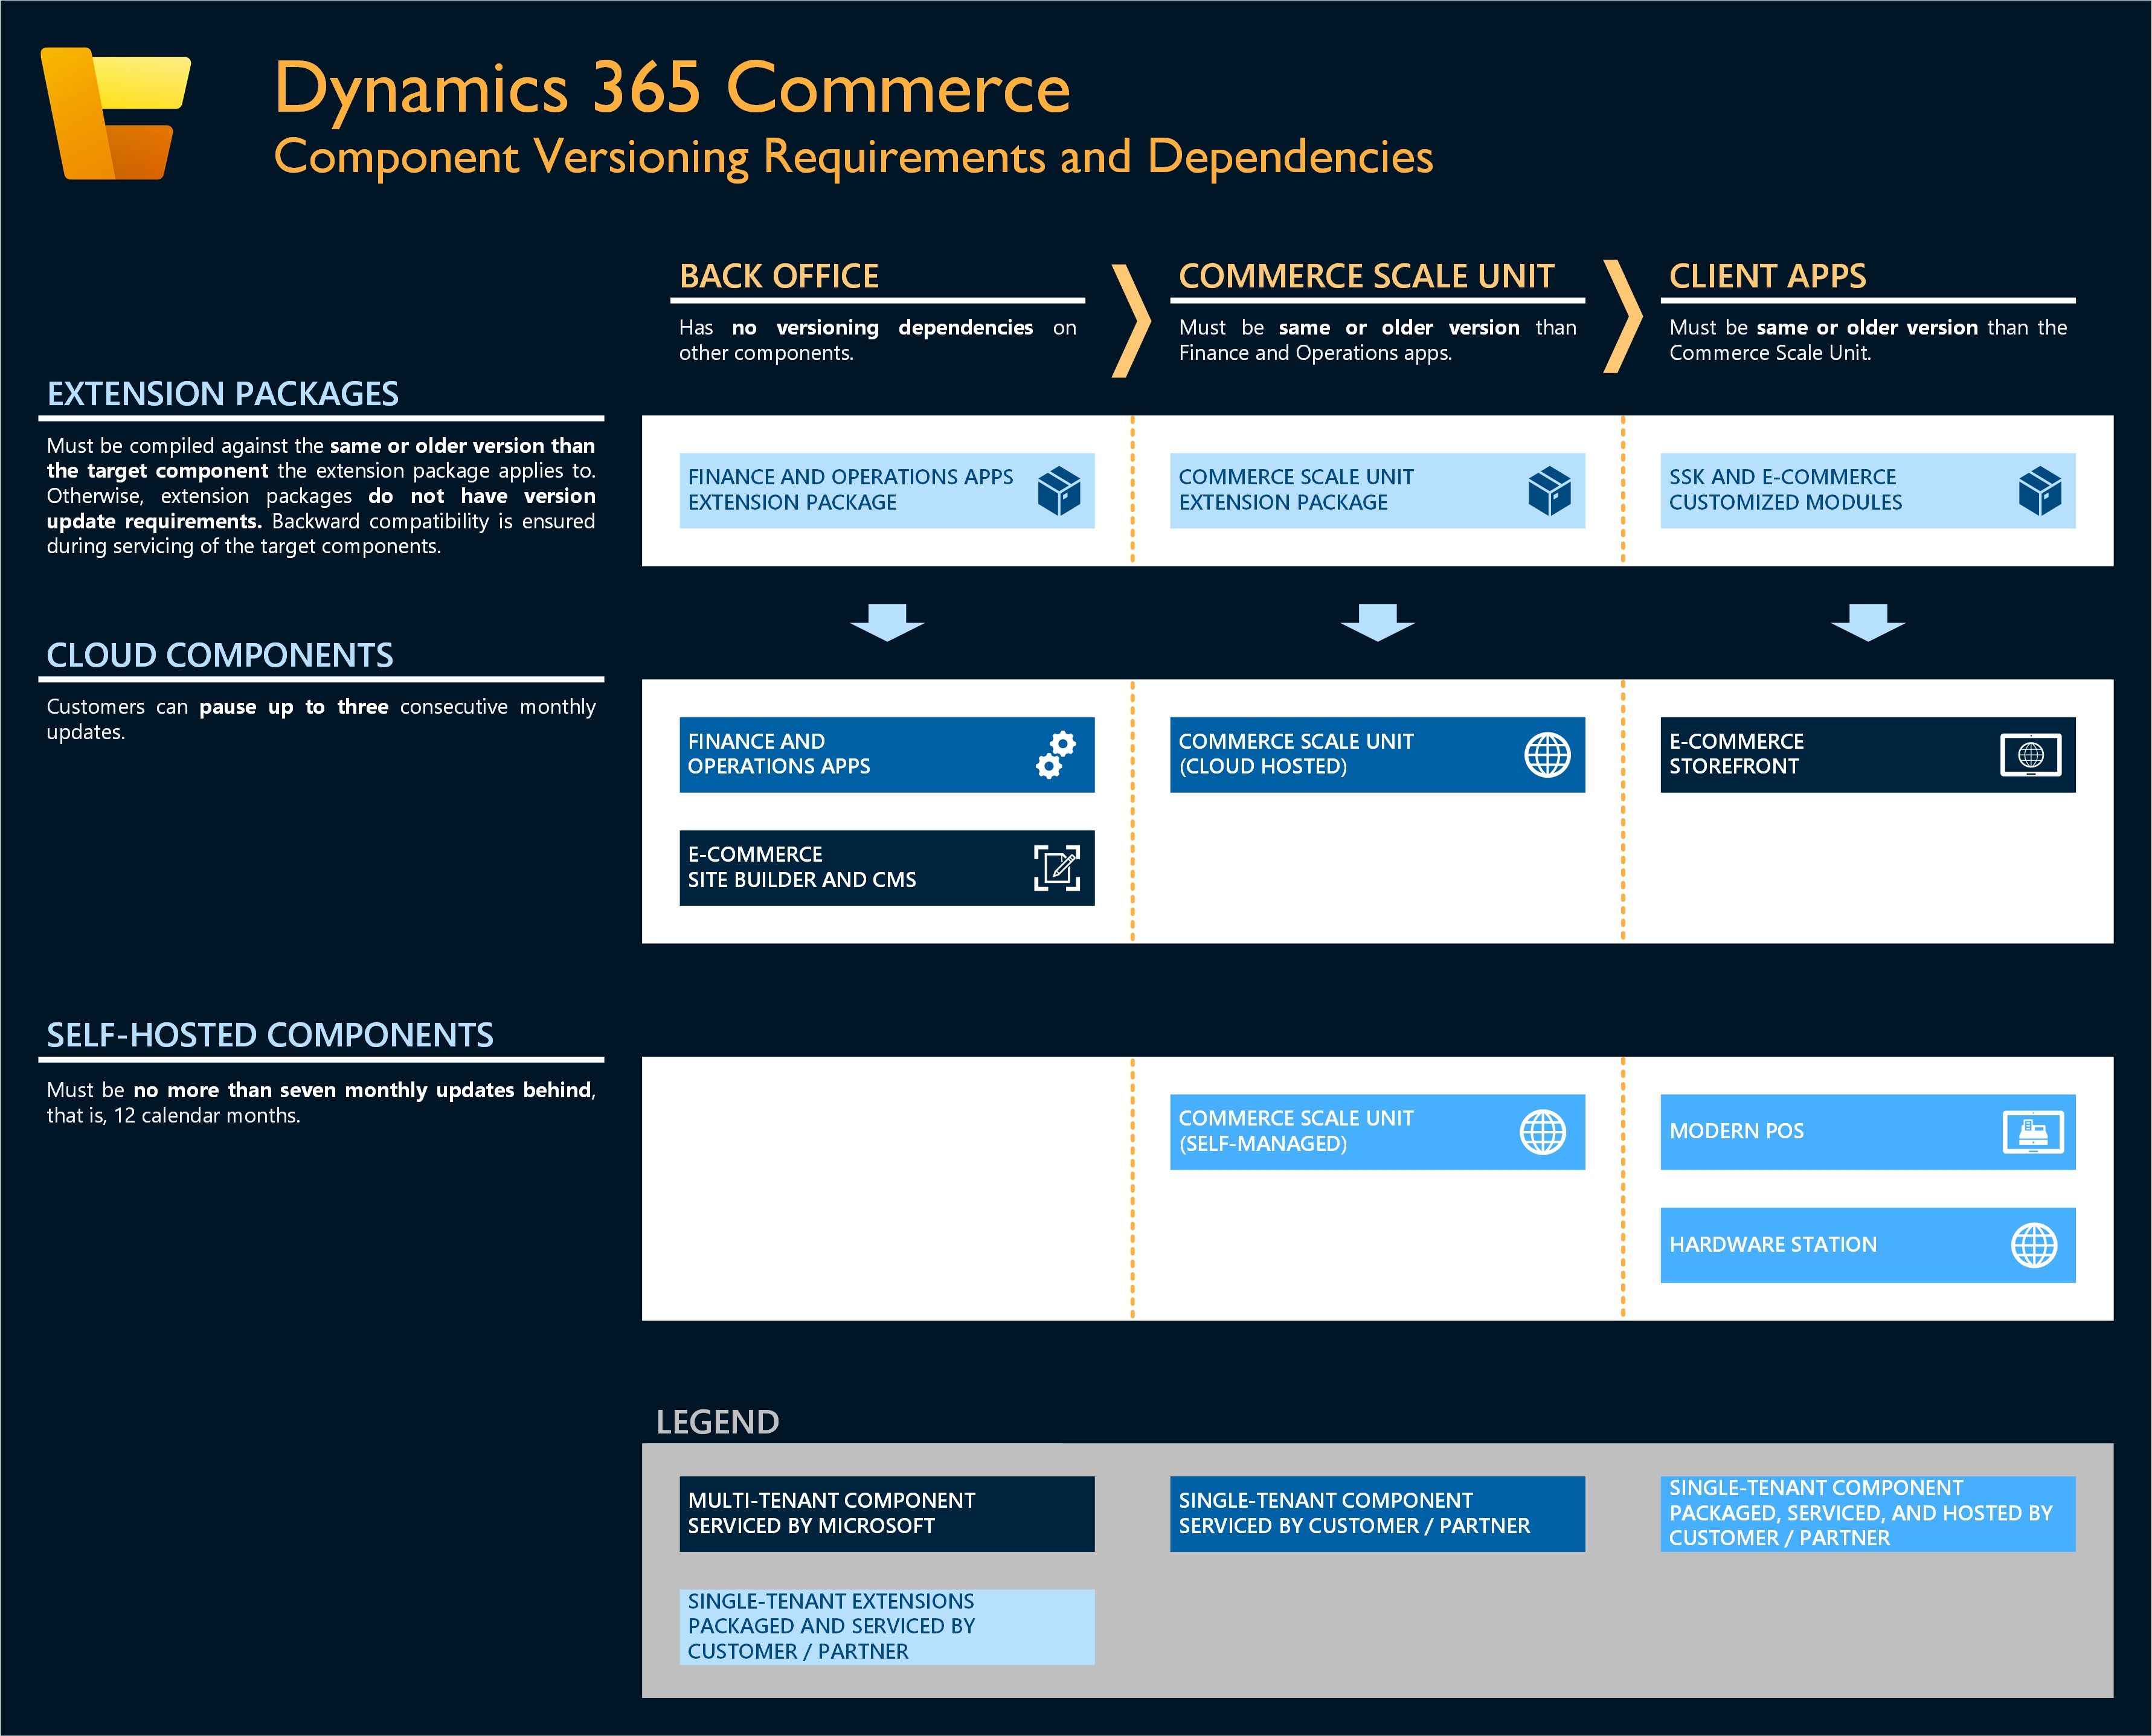 Dynamics 365 Commerce Component versioning requirements and dependencies.